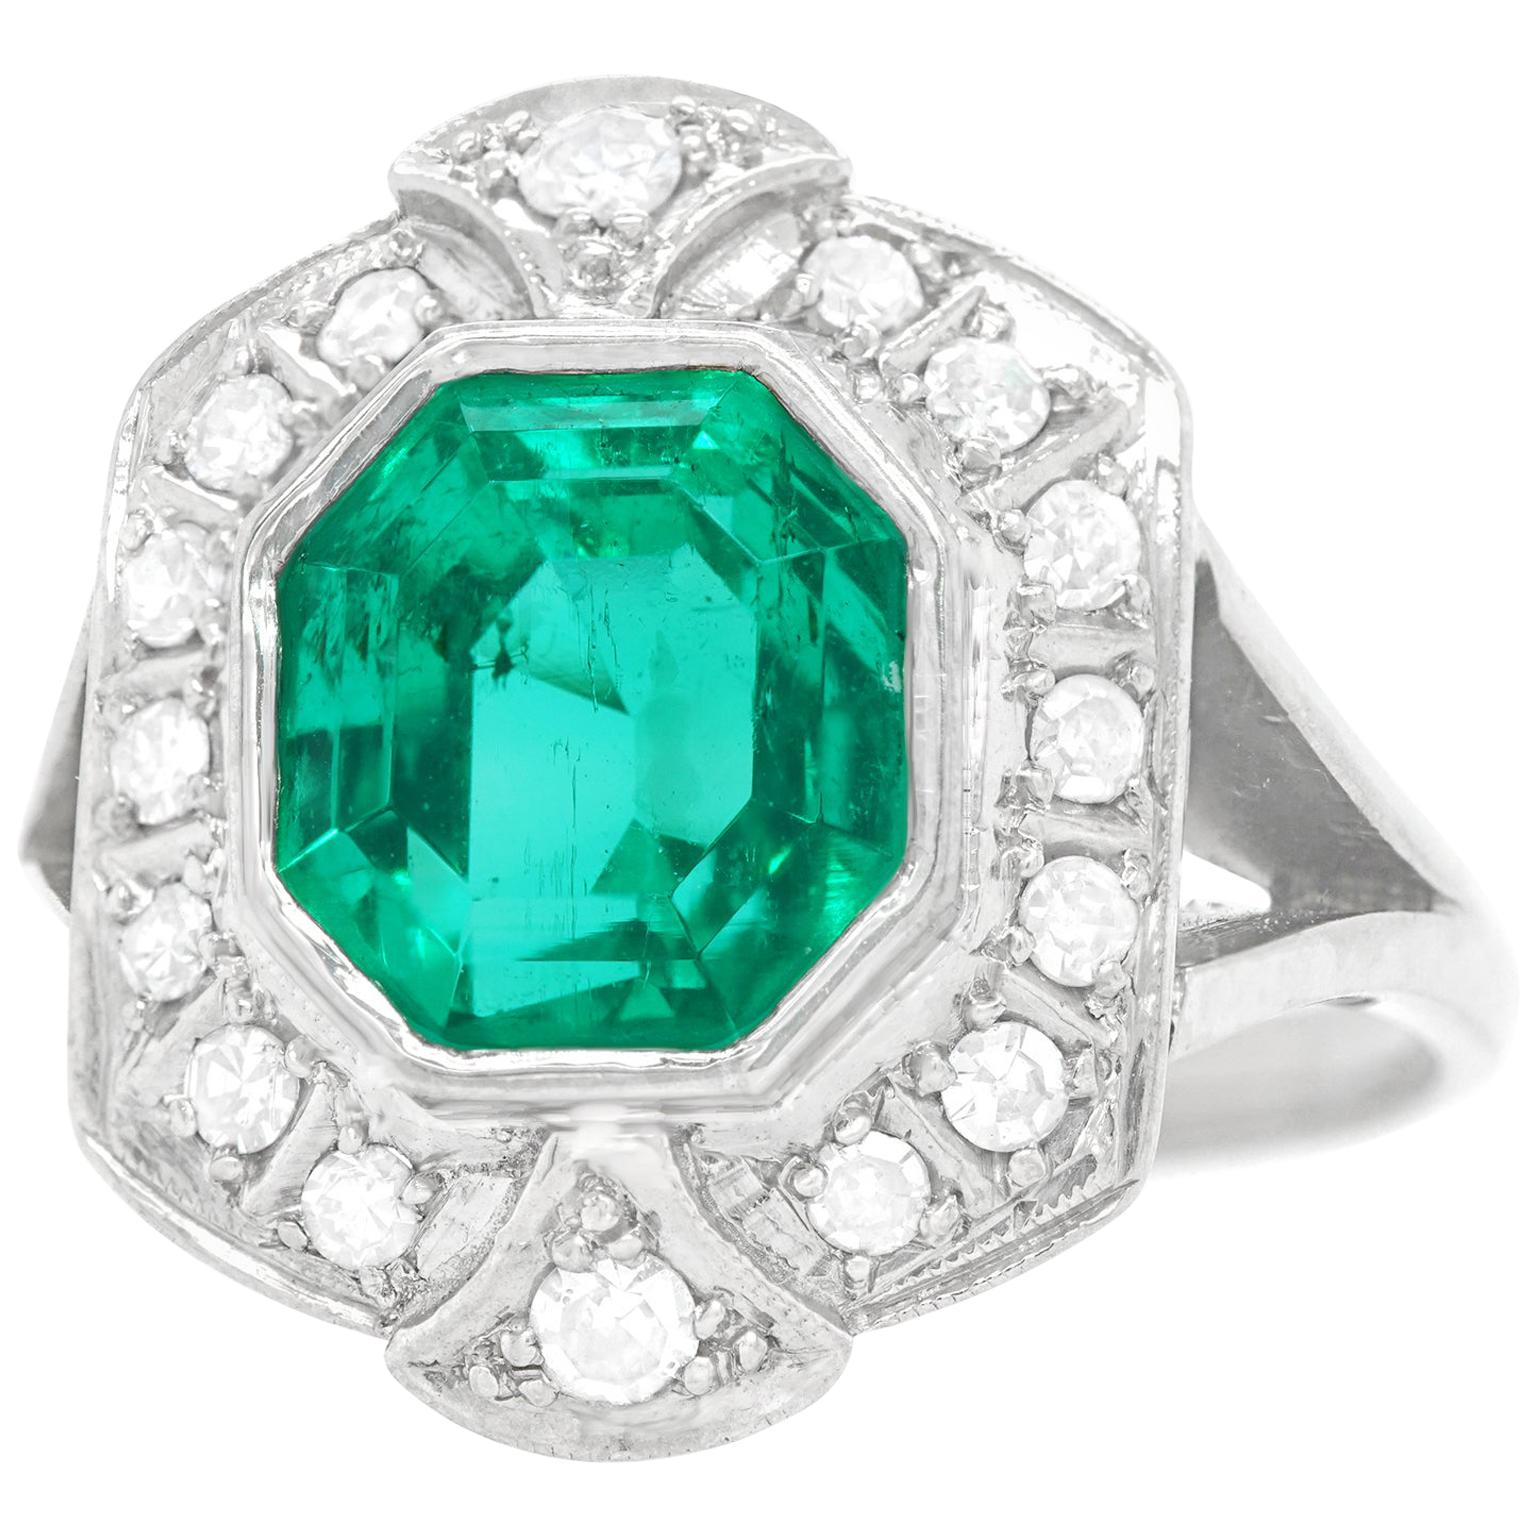 4.50 Carat Colombian Emerald and Diamond Art Deco Ring, GIA